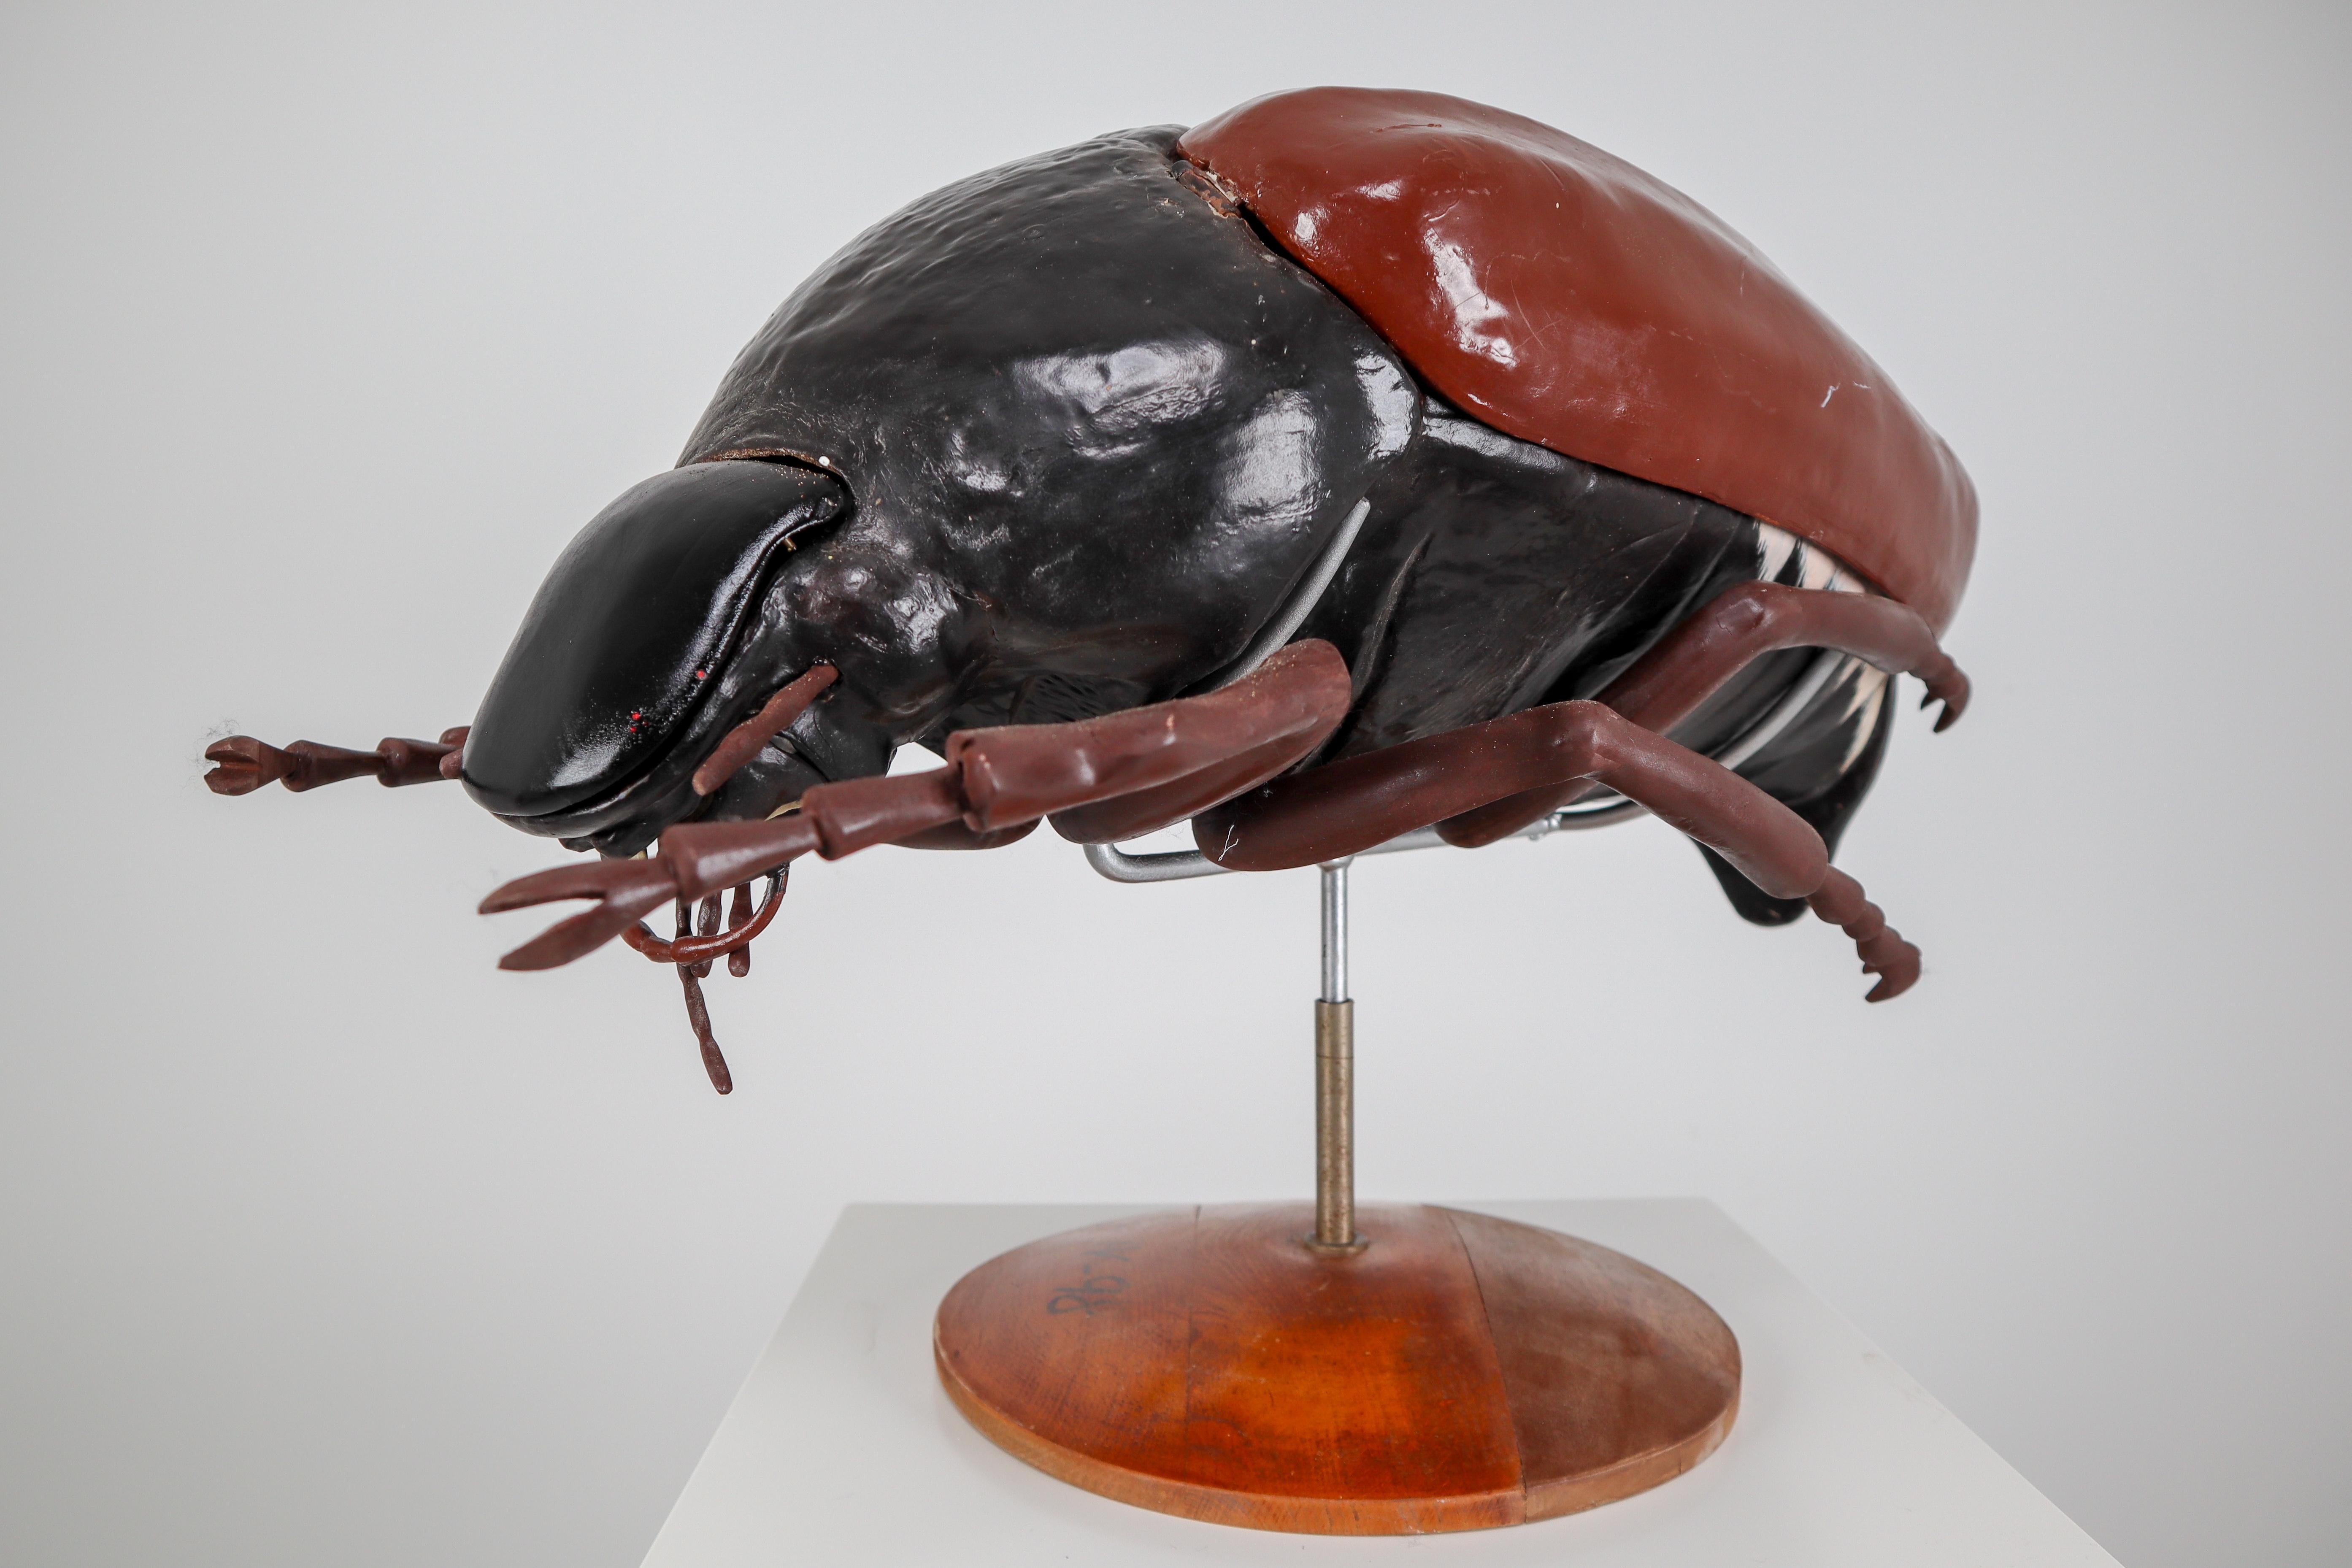 Mid-Century Modern Midcentury Large Early Anatomical Model of a Flying Beetle, Praque, 1950s